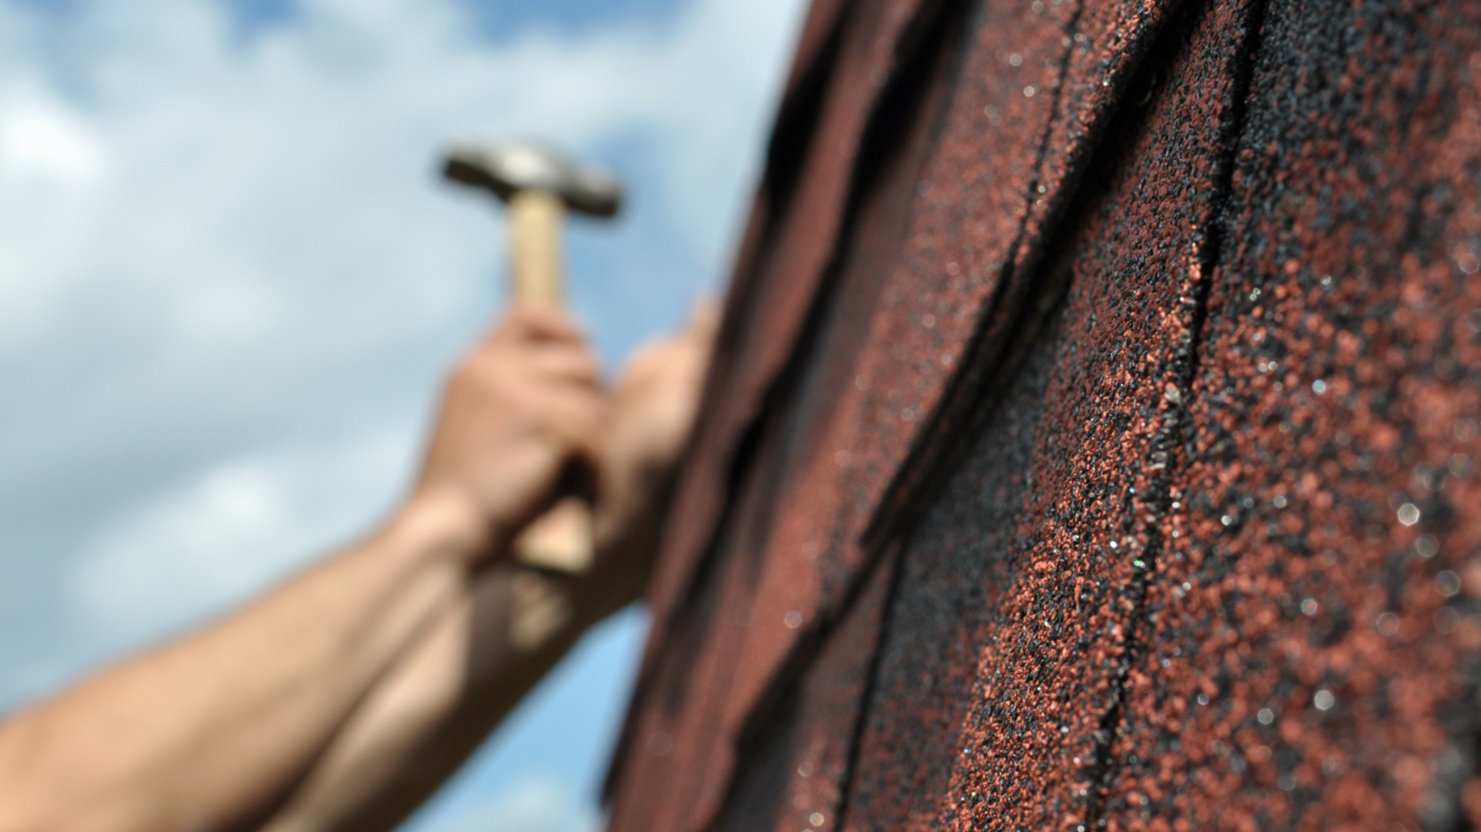 Roof Repair Company in Des Moines